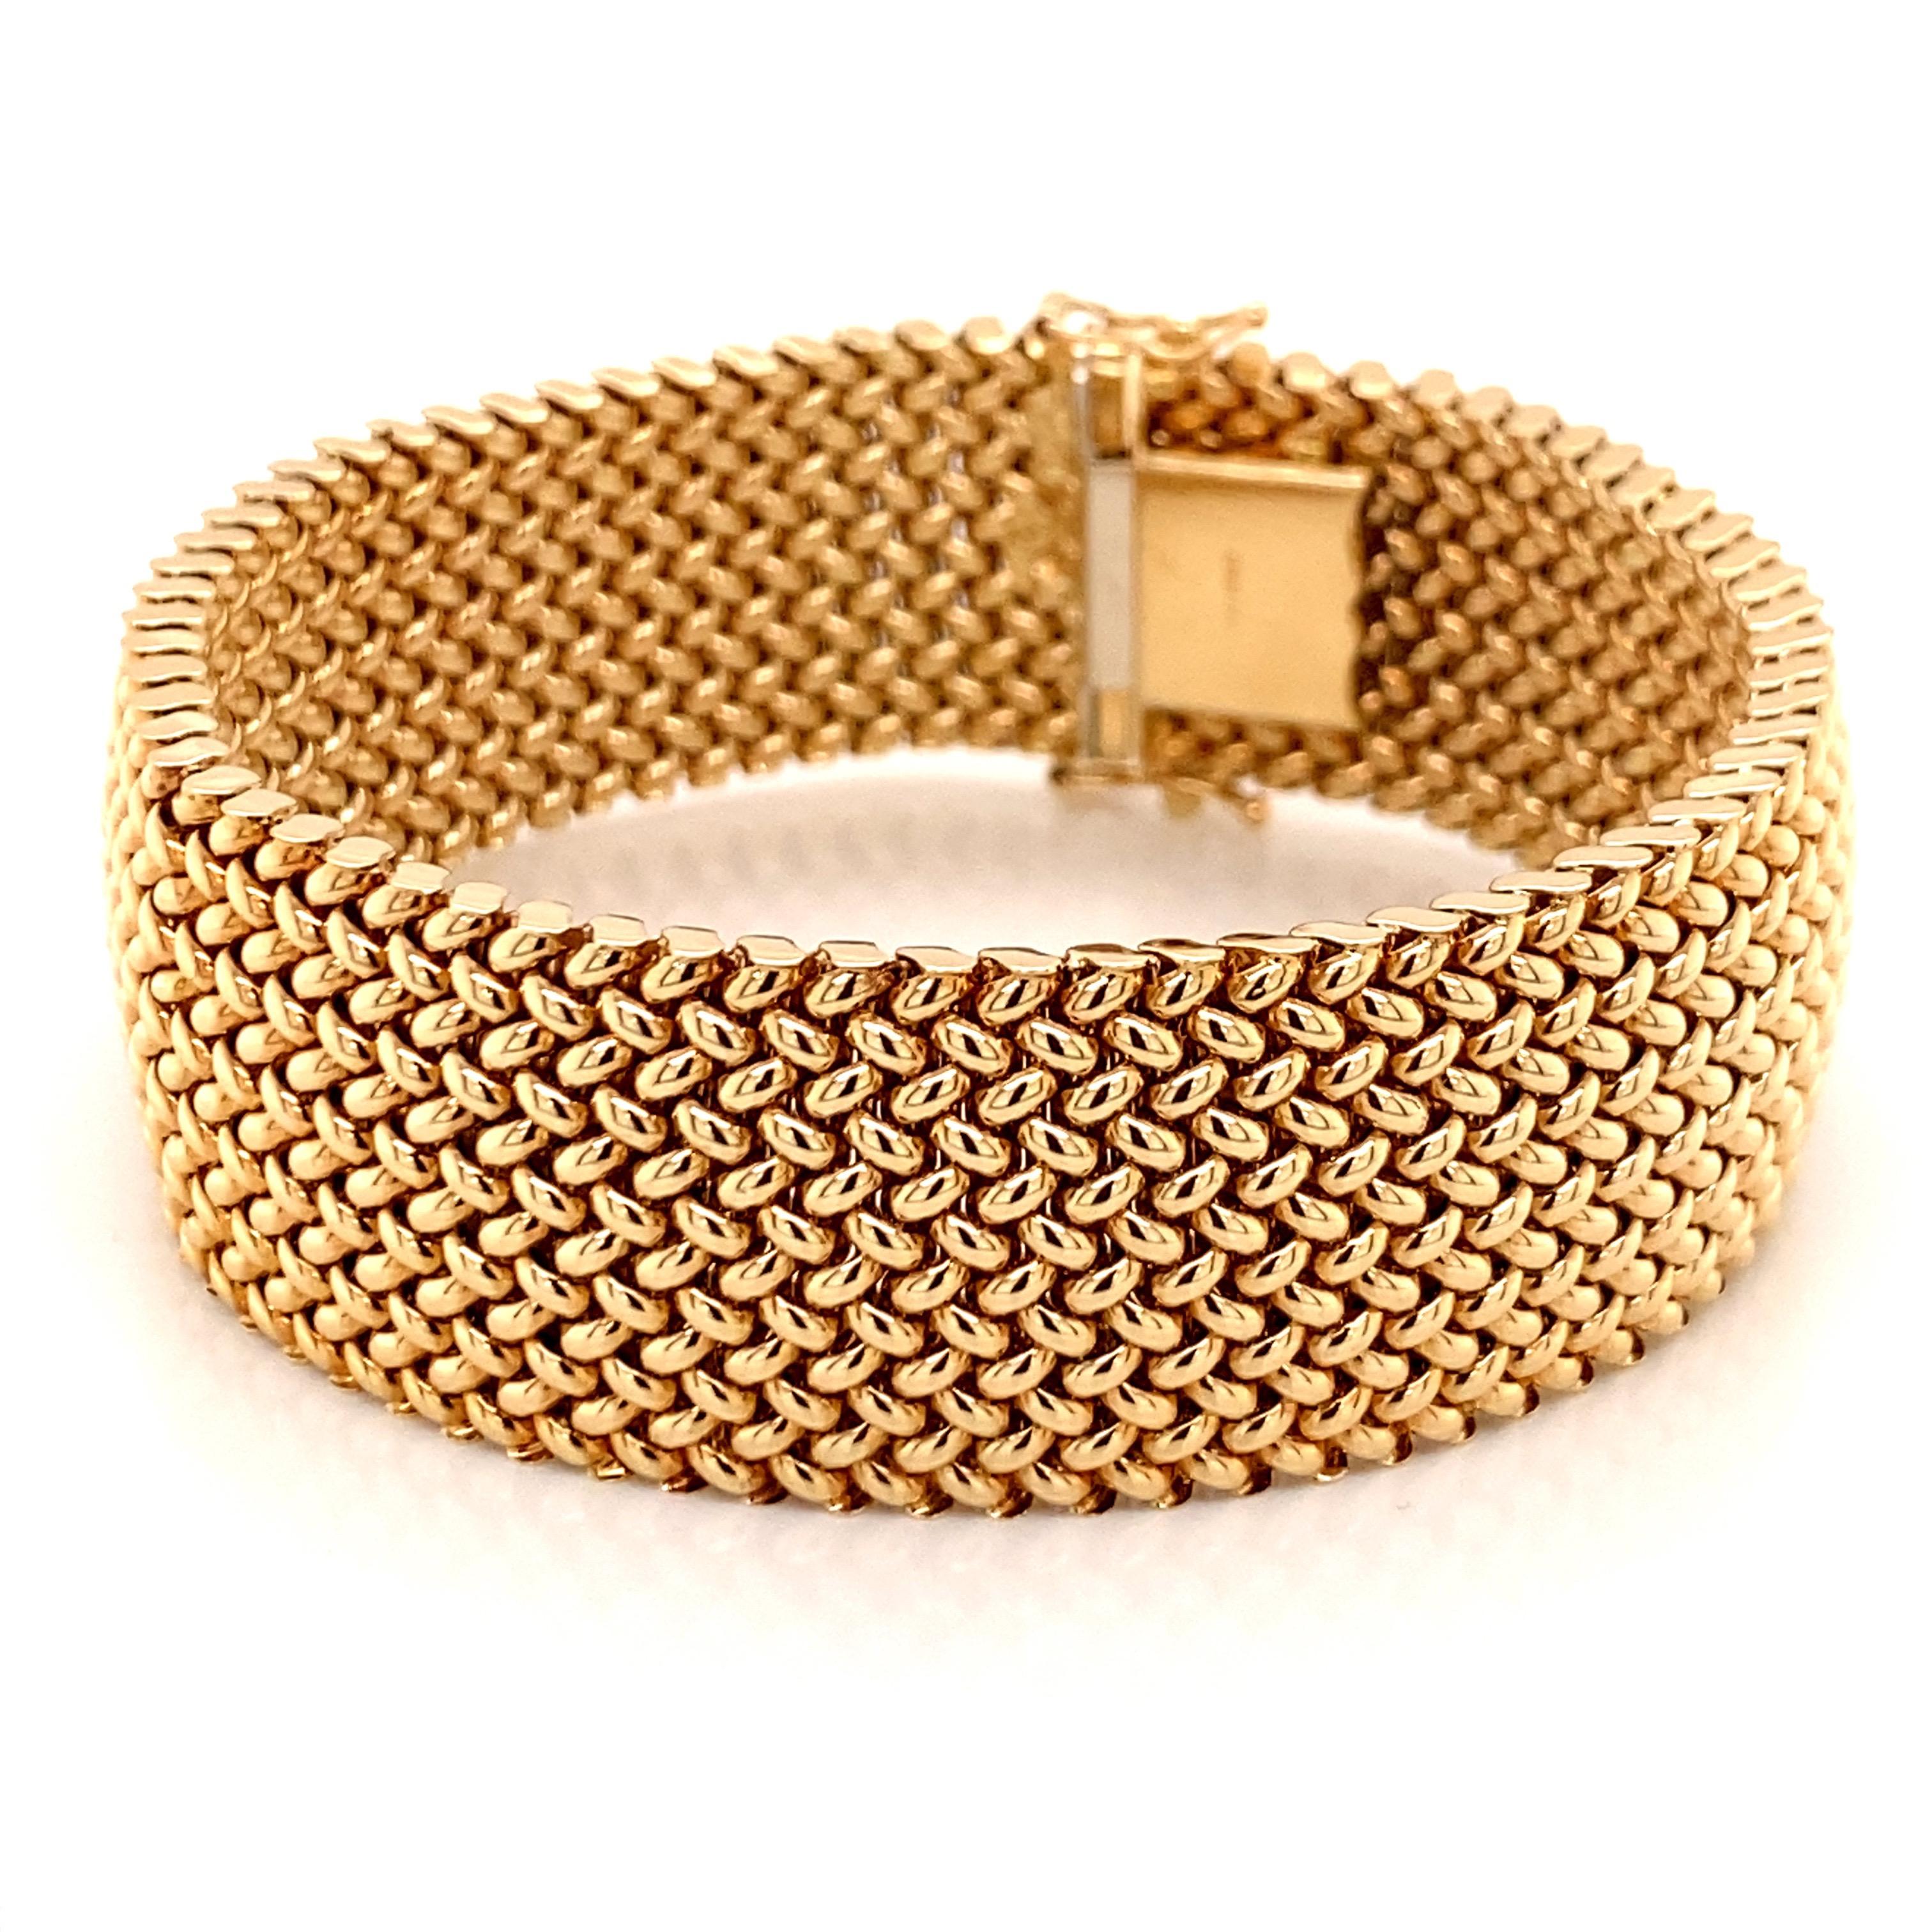 Vintage 1980's 14K Yellow Gold Wide Mesh Bracelet - The Italian made bracelet measures 7 1/2 inches long and 7/8 inches wide. The clasp is a hidden barrel clasp with 2 safety figure 8's. The bracelet weighs 38.5 grams.